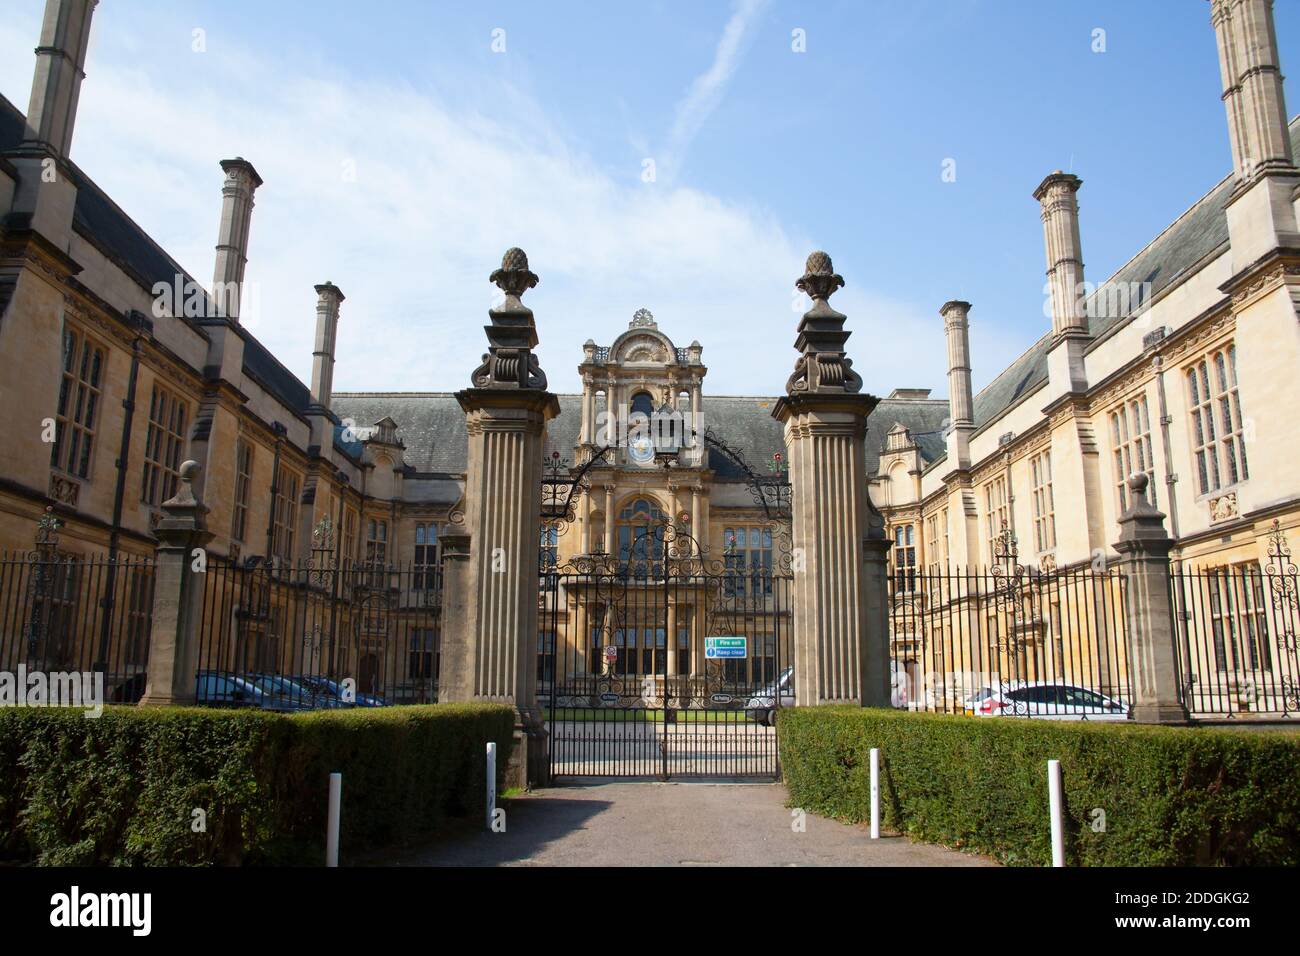 Merton College in Oxford, part of The University of Oxford in the UK, taken on the 15th of September 2020 Stock Photo